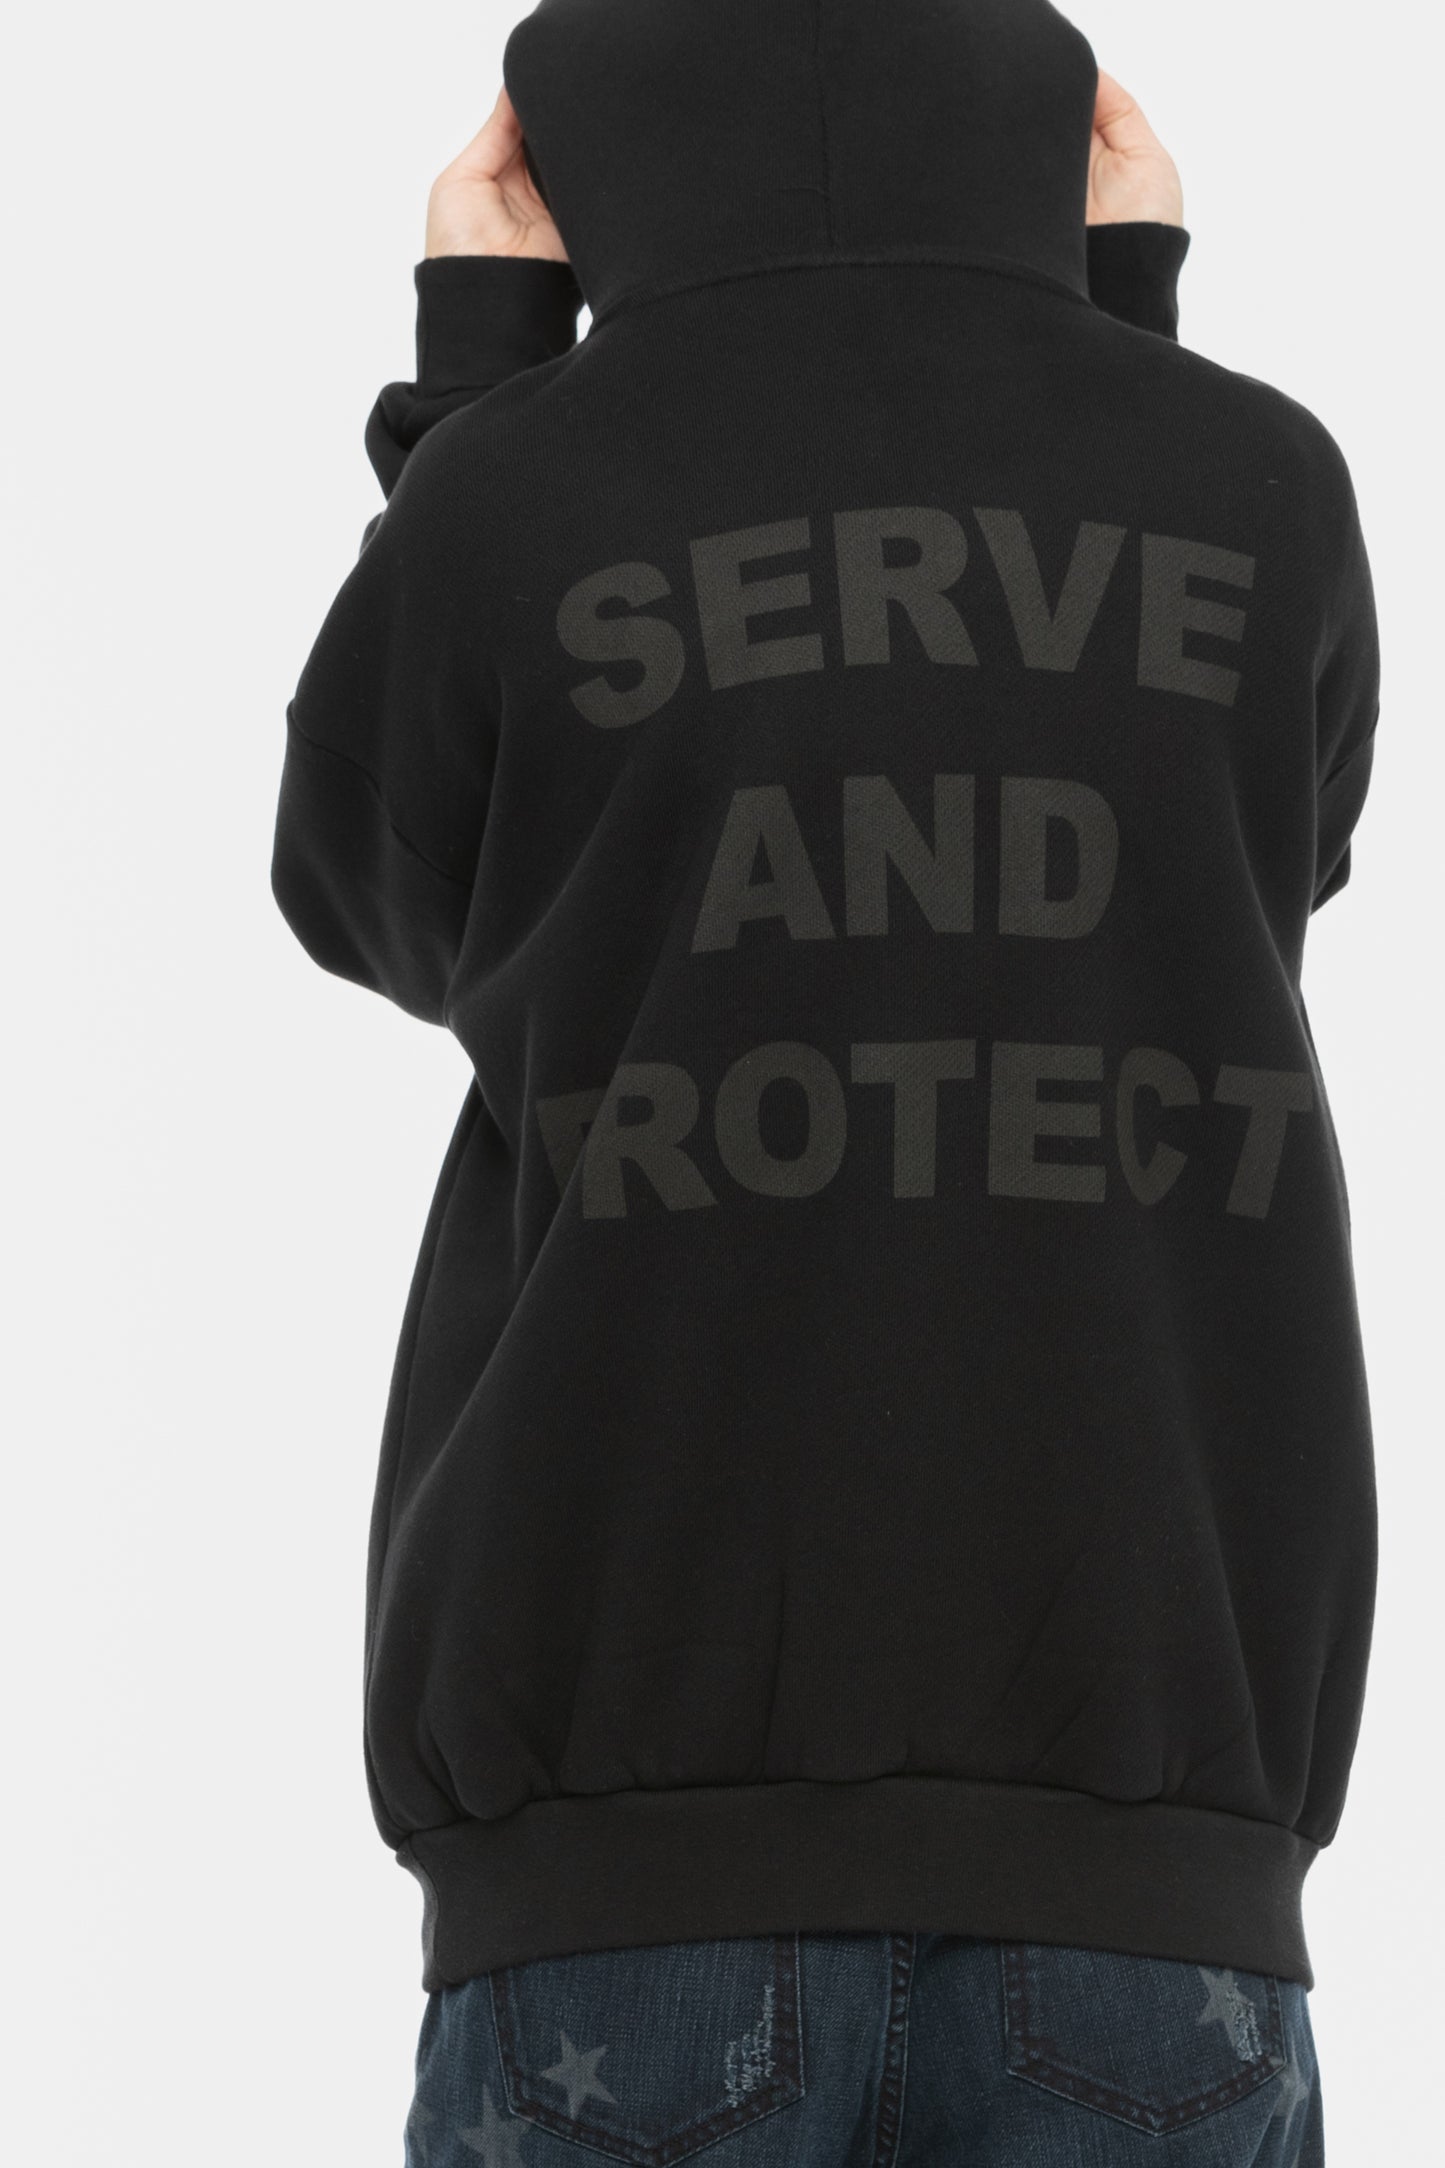 SERVE AND PROTECT HOODIE BLACK